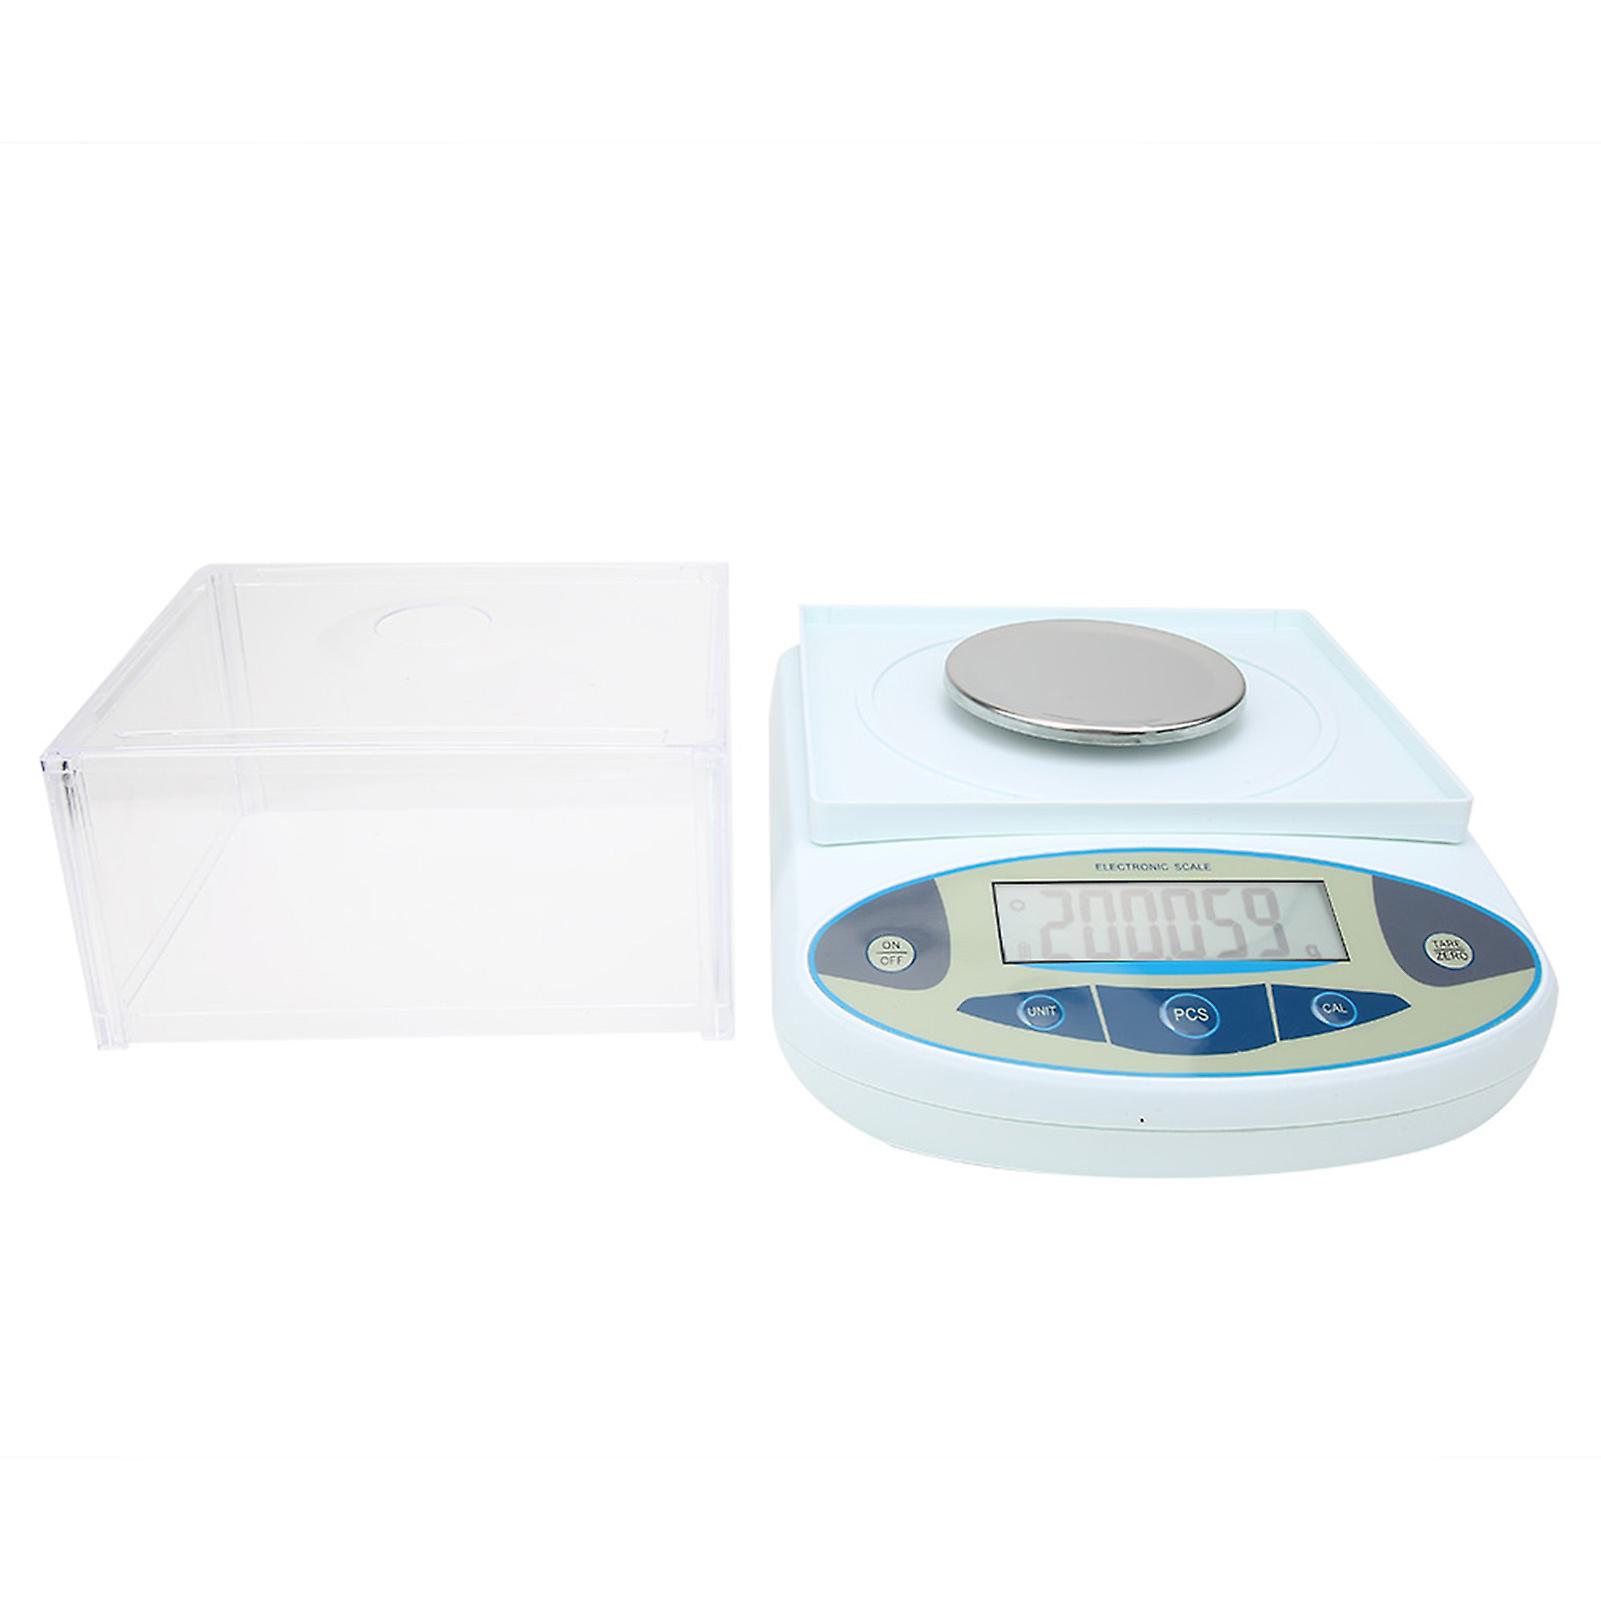 3000g Precision Laboratory Balance Digital Electronic Jewelry Scale With High Accuracy And Various Functions[us Plug]